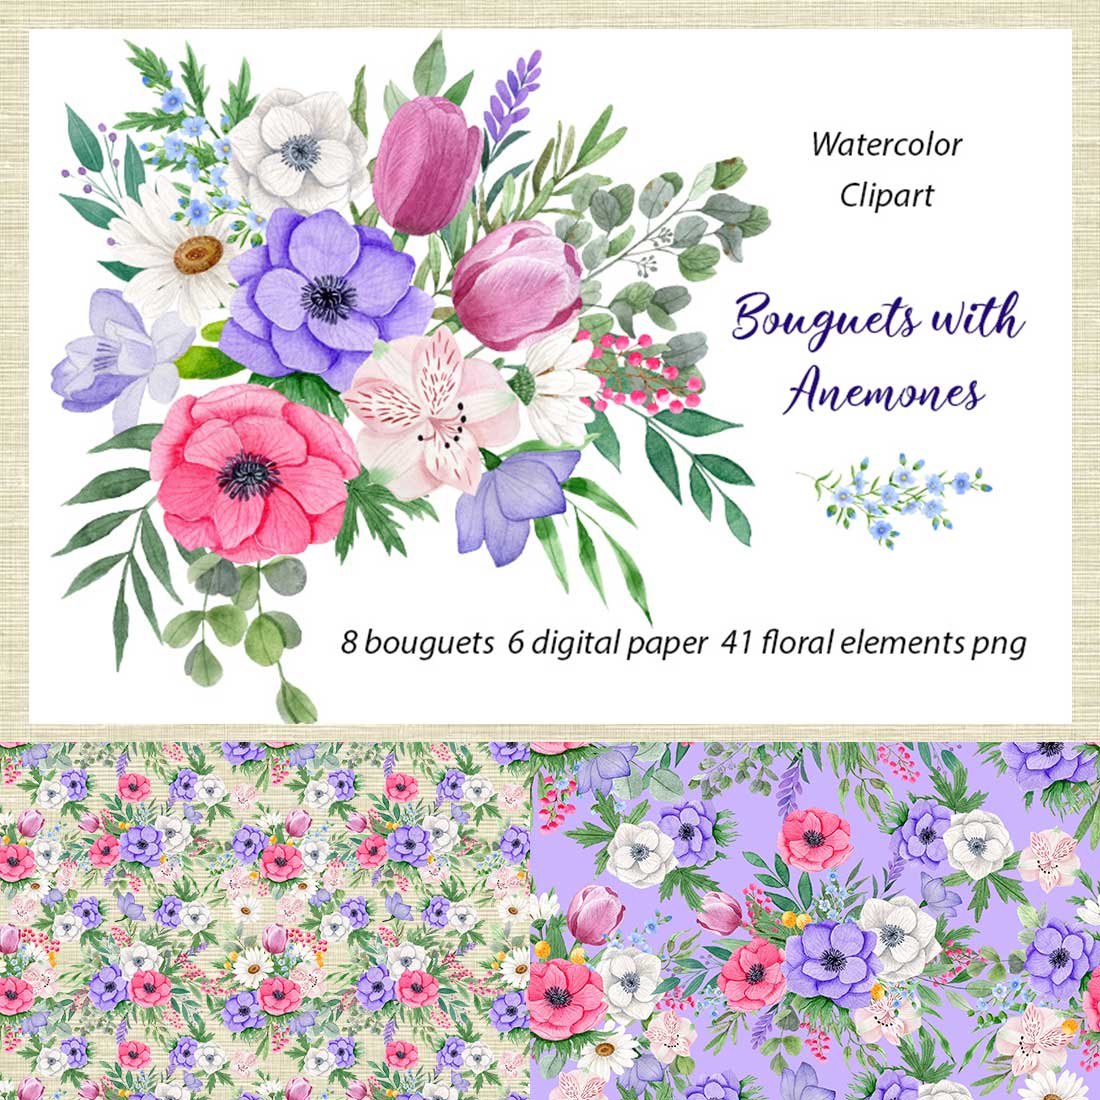 Watercolor Flower Bouquets of Anemones, Tulips, Daisies cover image.